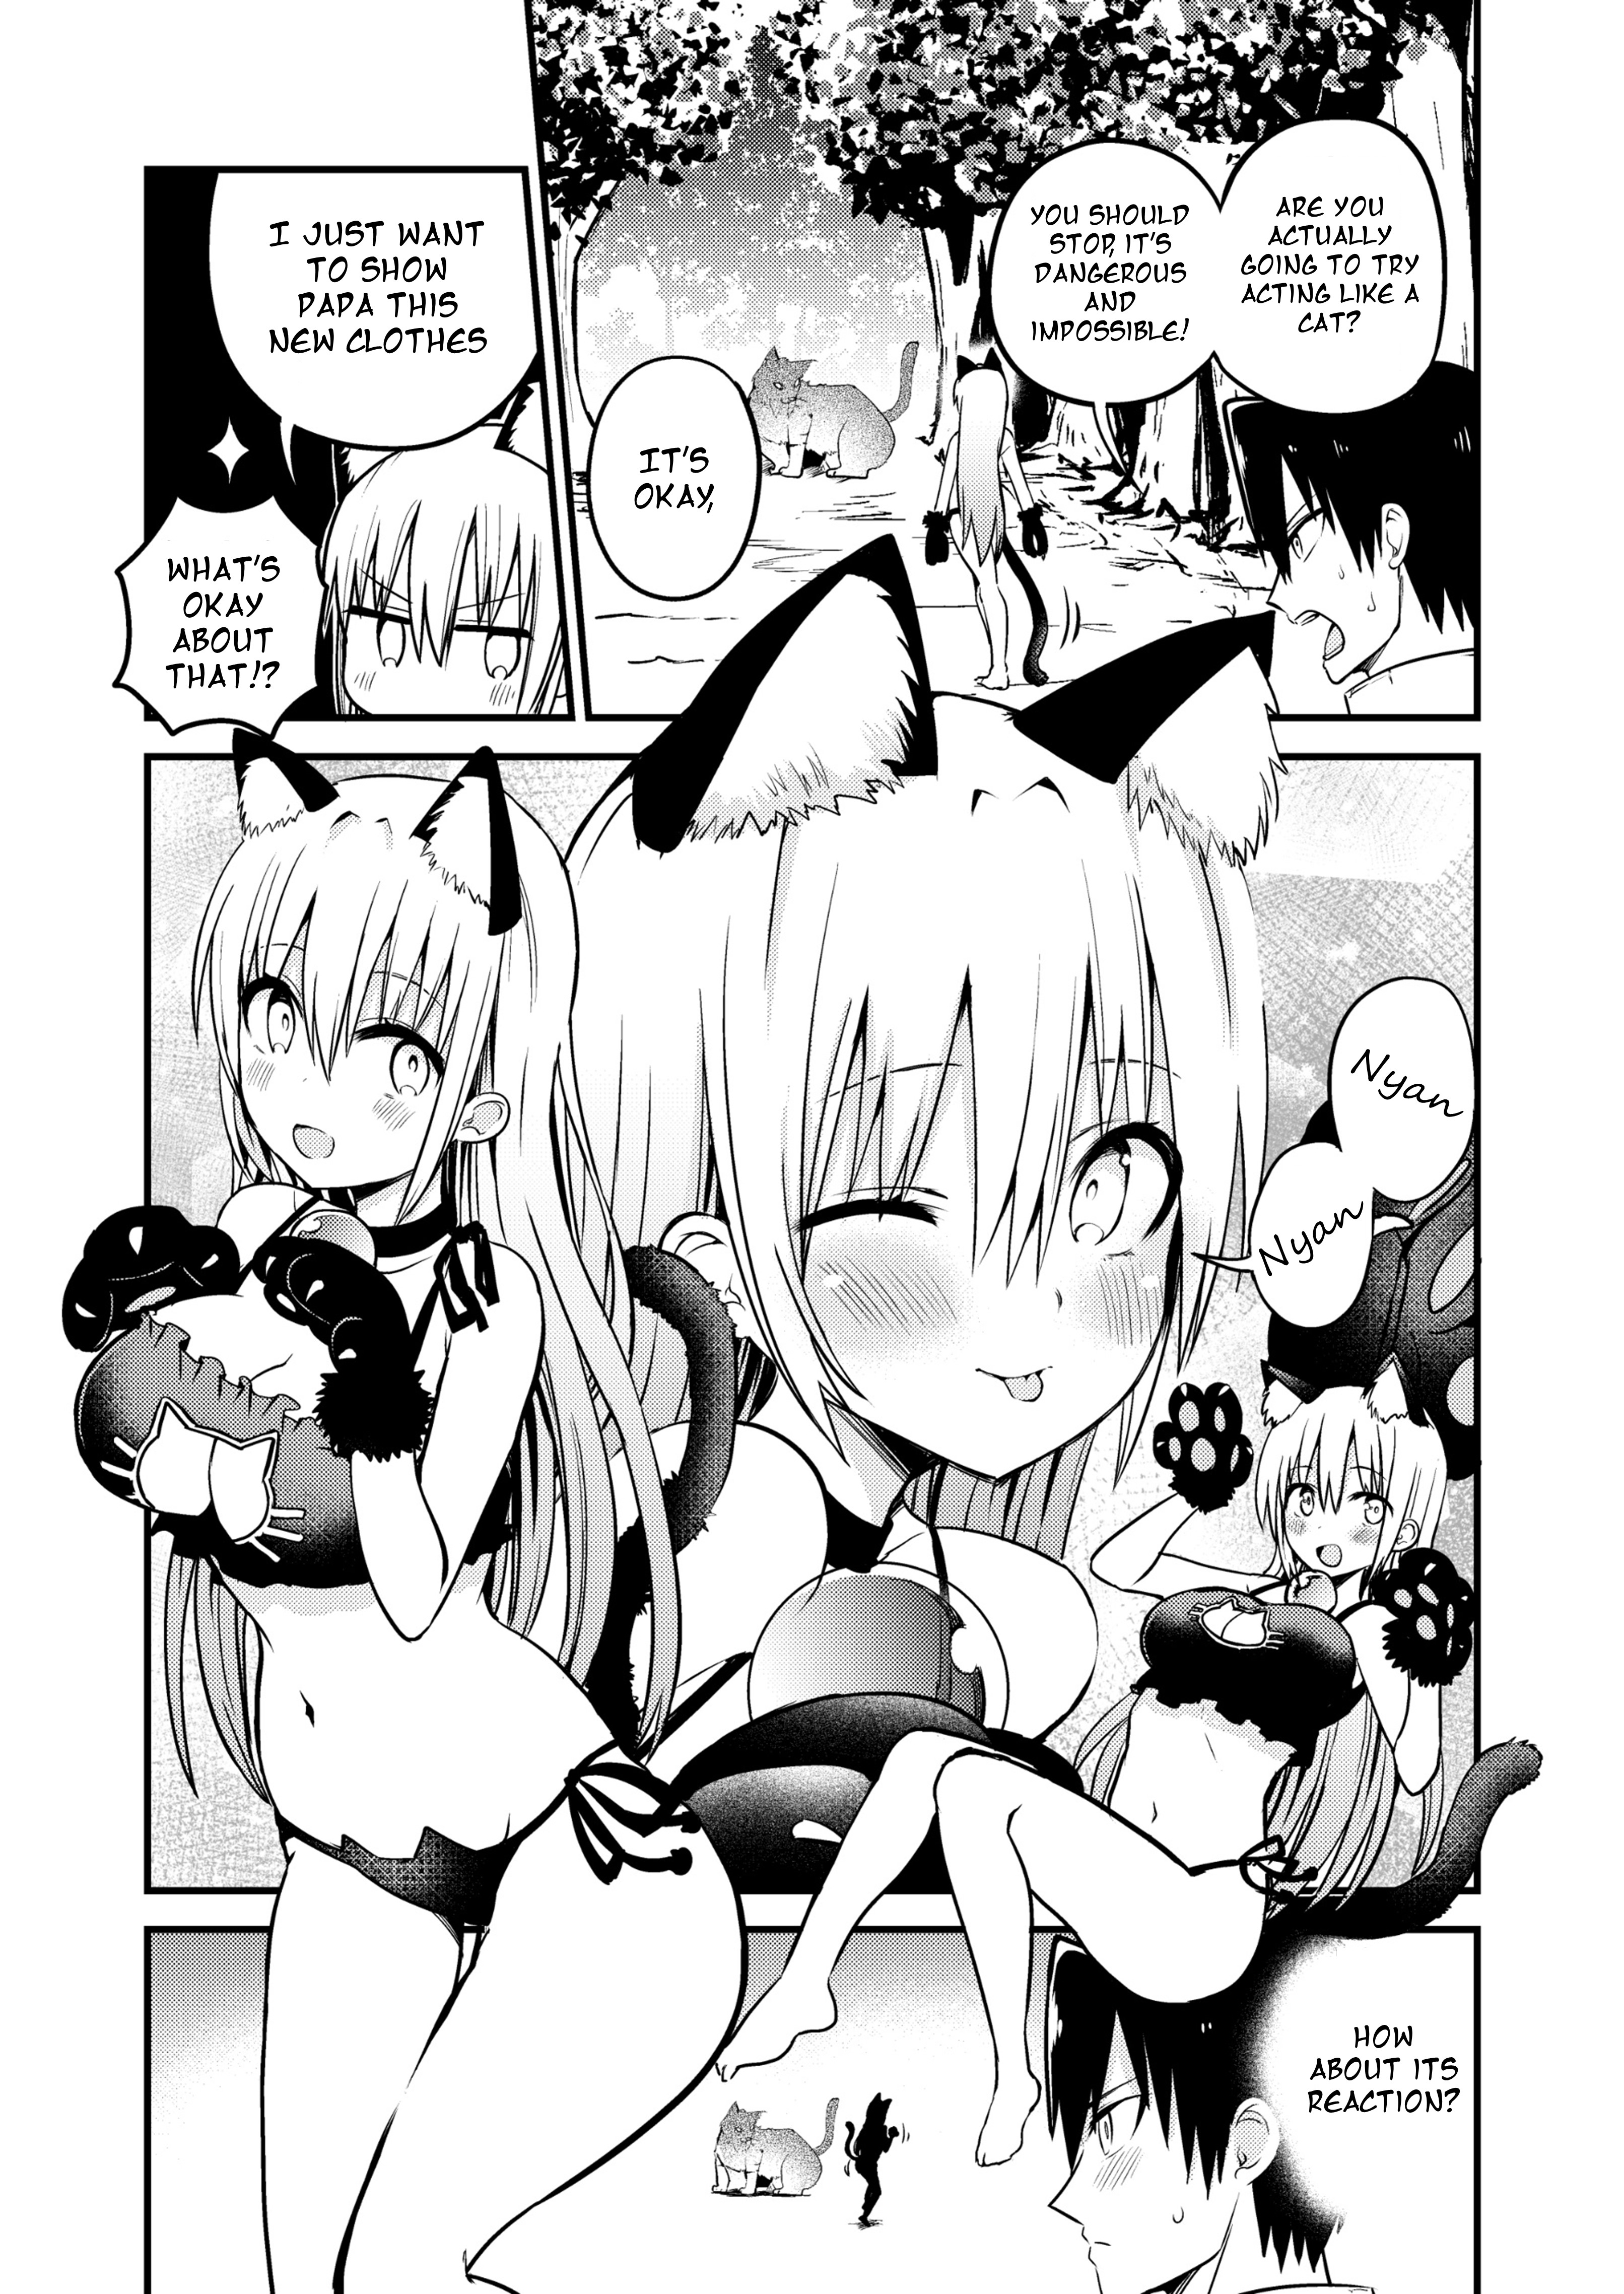 Shiro Madoushi Syrup-San Vol.1 Chapter 25.5: White Mage Syrup-San And A Cat - Picture 2